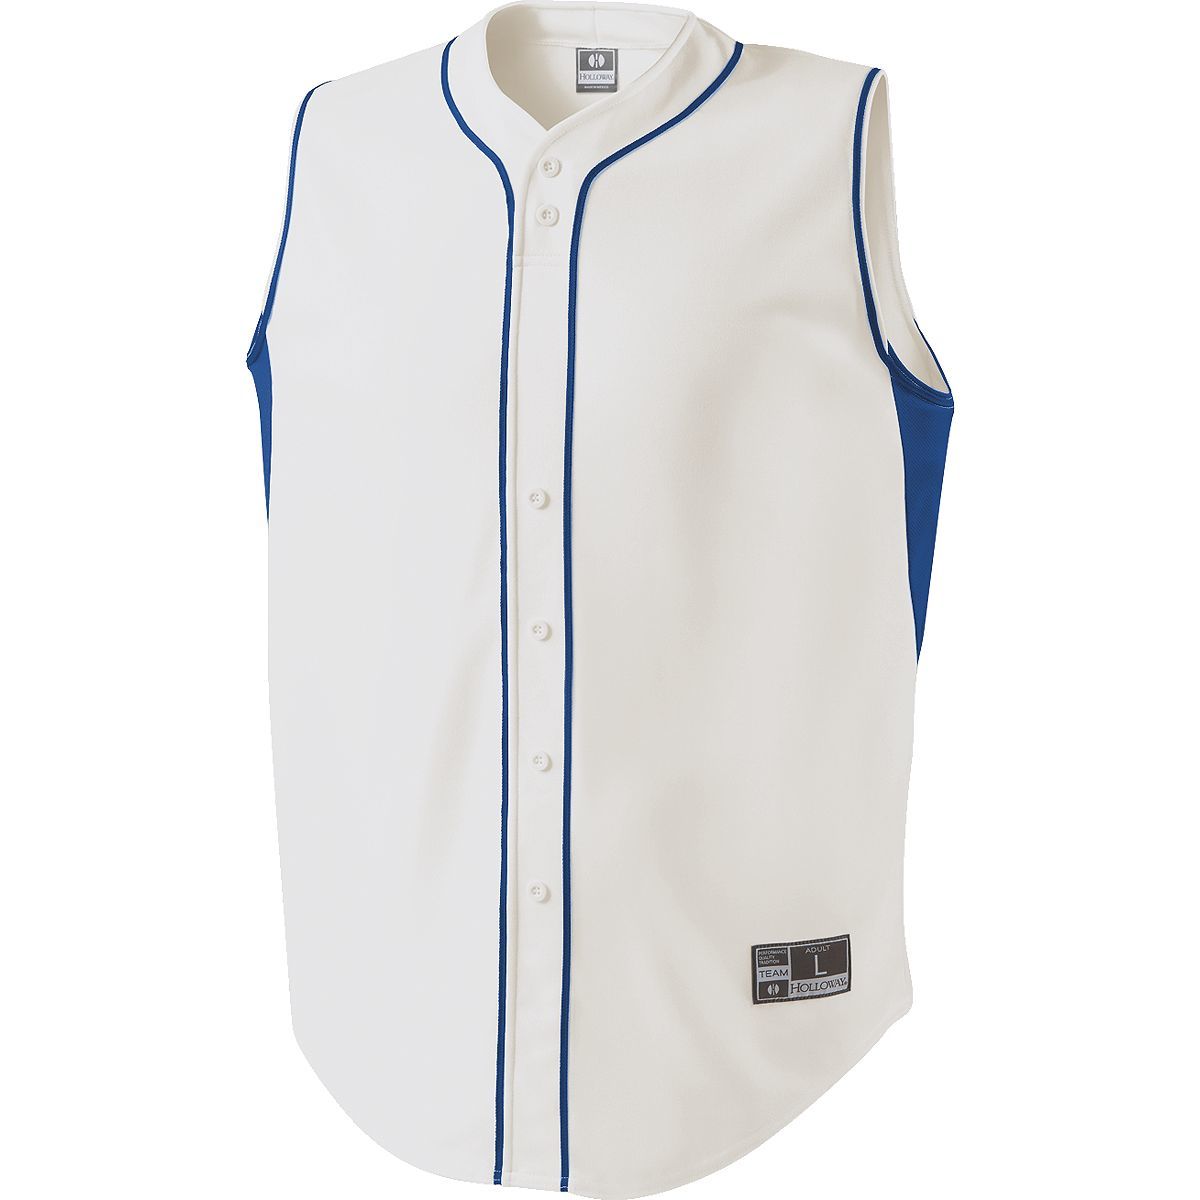 Holloway Fierce Jersey in White/Royal  -Part of the Adult, Adult-Jersey, Baseball, Holloway, Shirts, All-Sports, All-Sports-1 product lines at KanaleyCreations.com